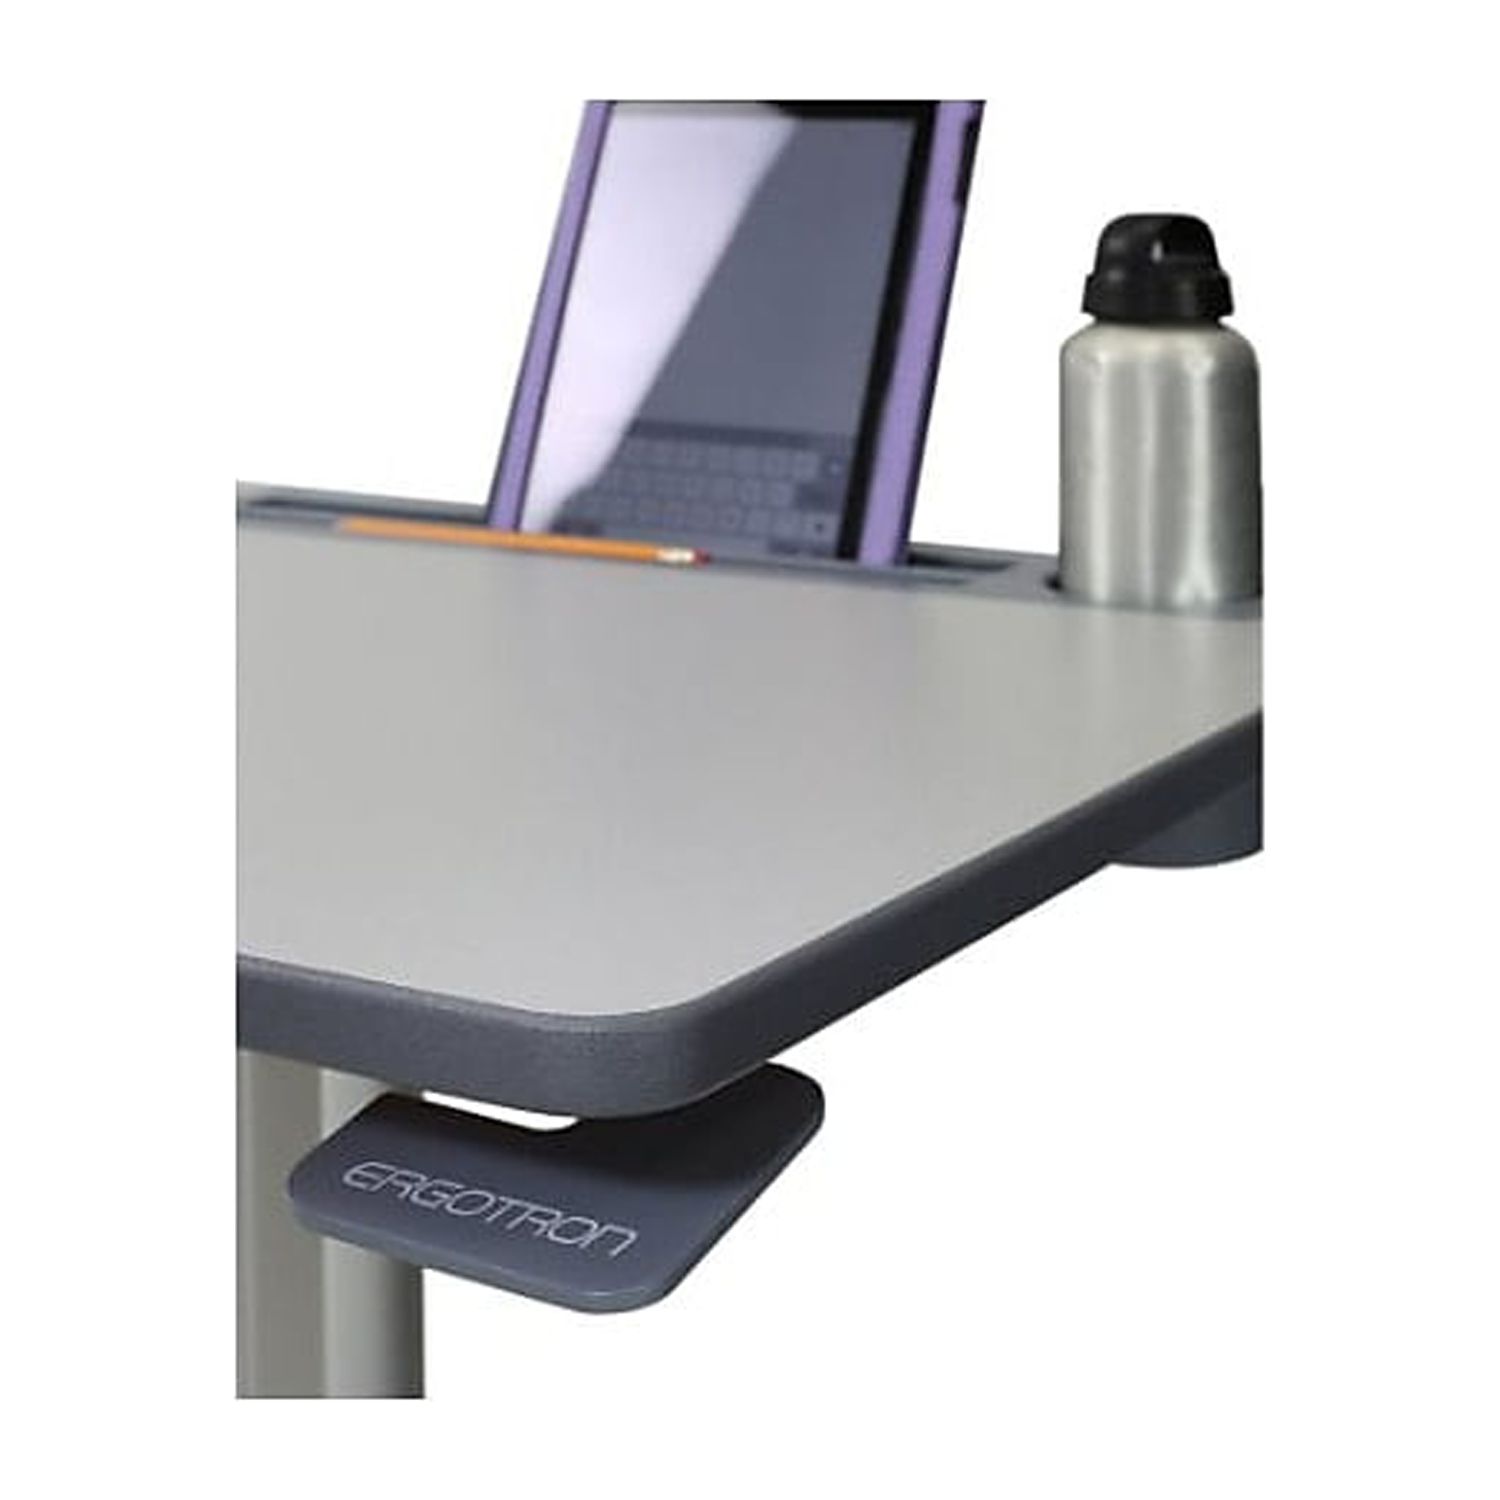 Ergotron LearnFit Sit-Stand Desk, Tall - image 4 of 6